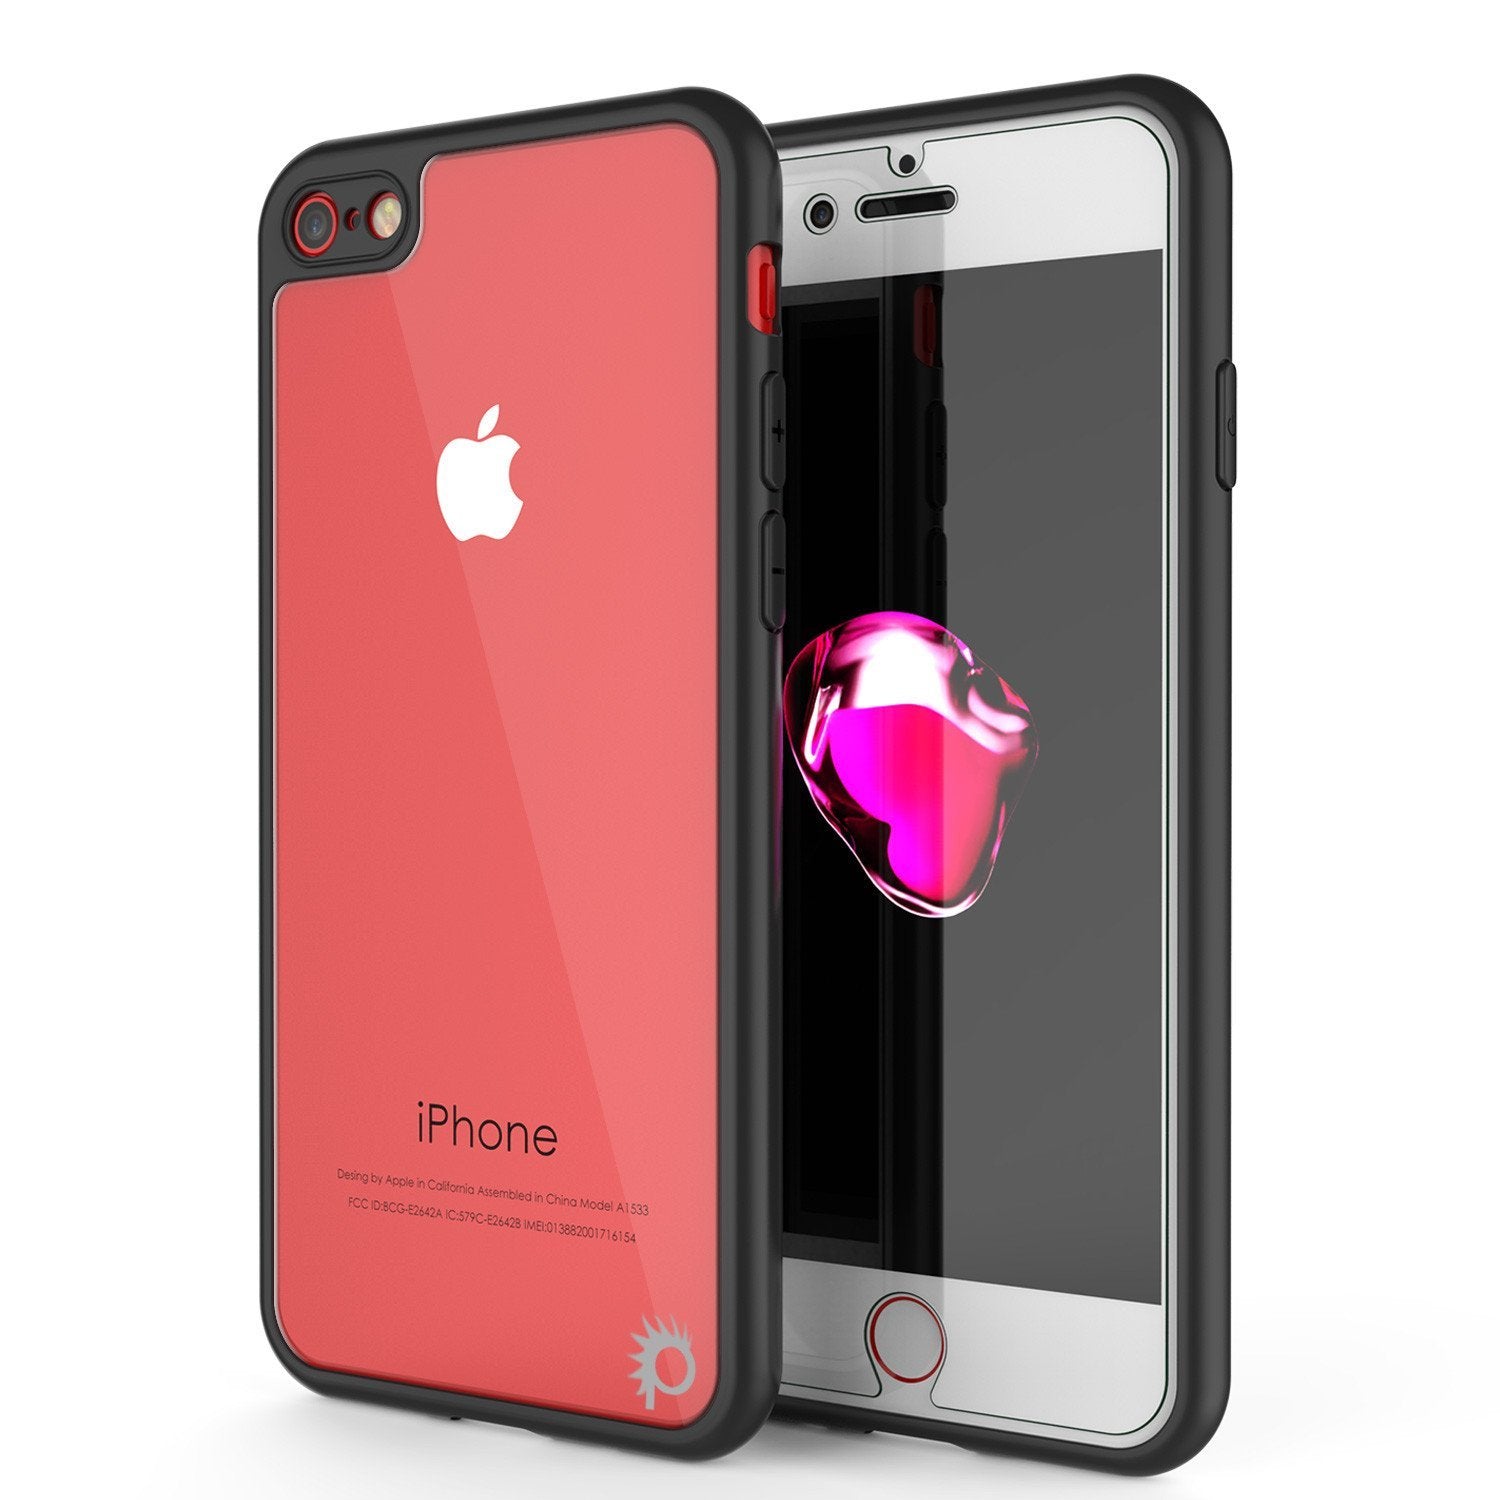 iPhone 8 Case [MASK Series] [BLACK] Full Body Hybrid Dual Layer TPU Cover W/ protective Tempered Glass Screen Protector - PunkCase NZ